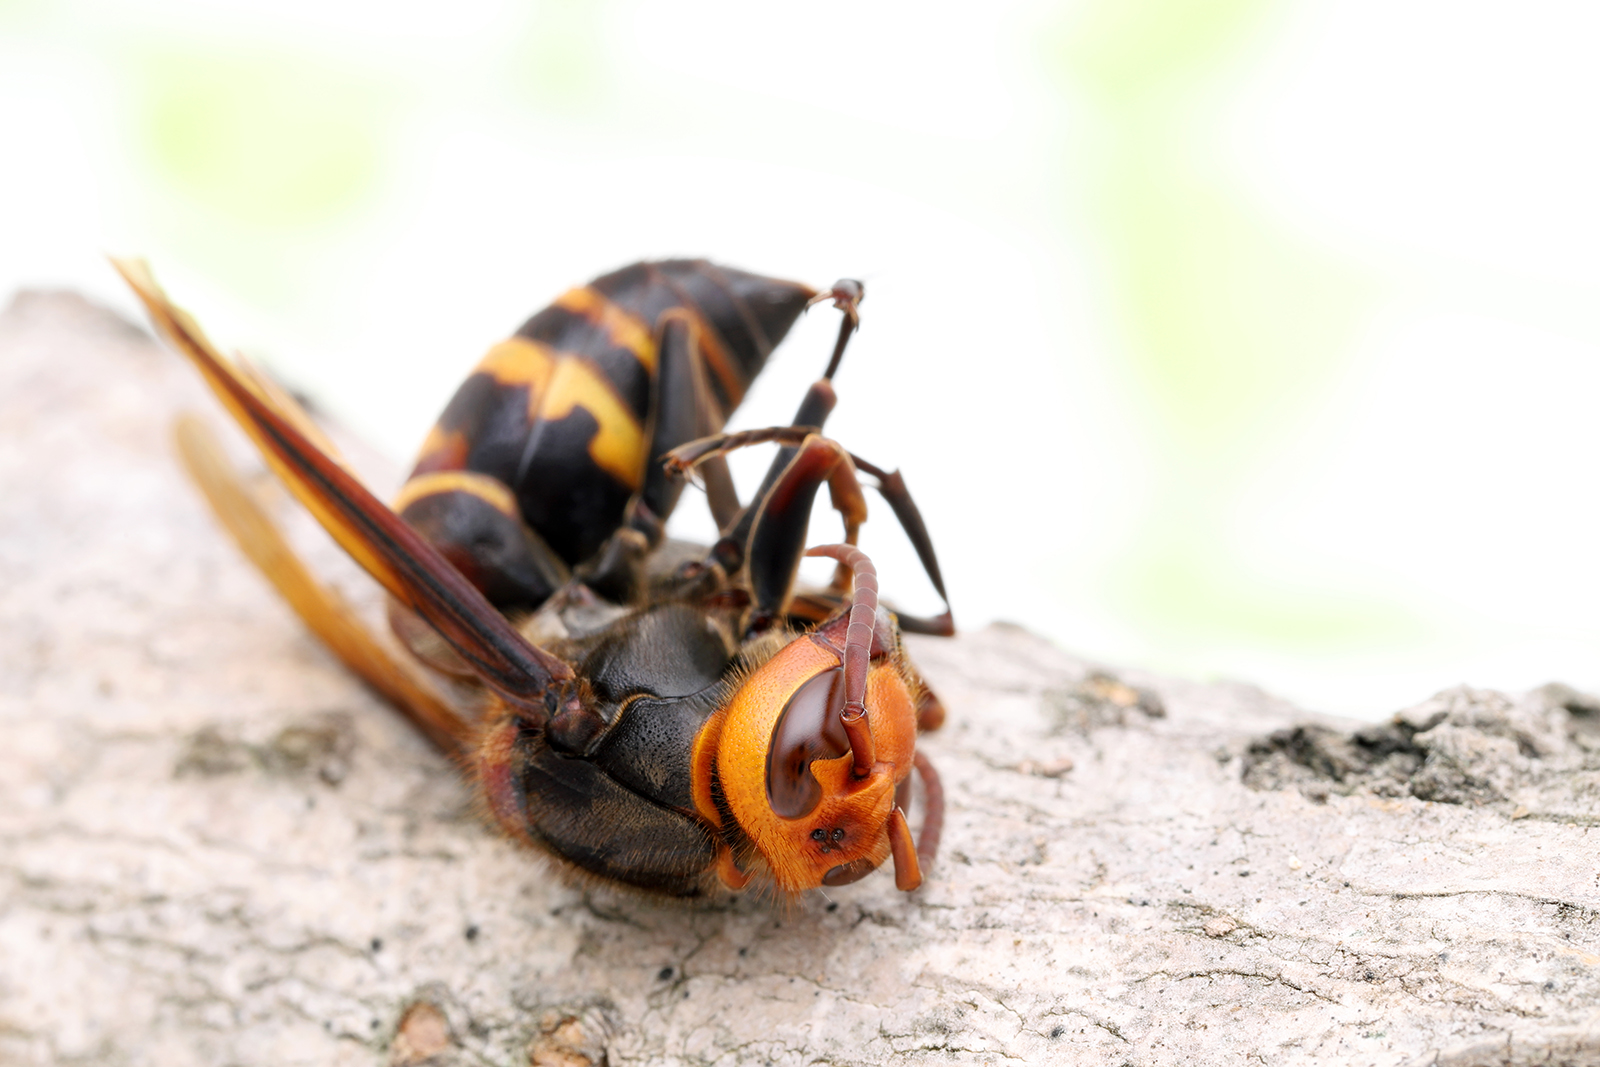 Do wasps sting themselves when dying?